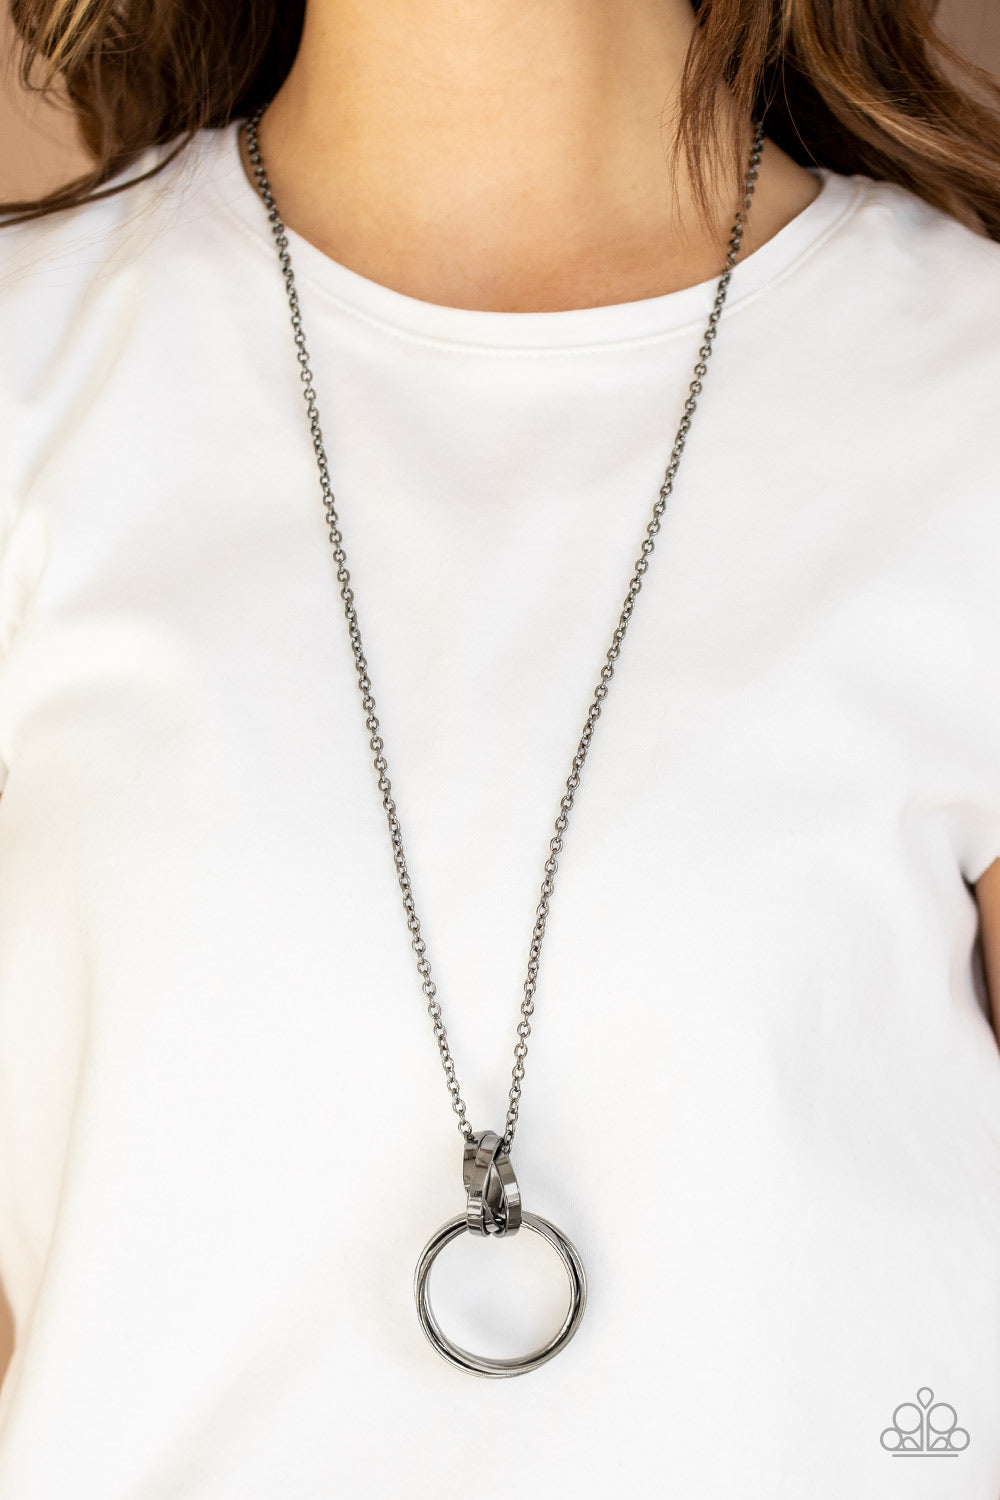 Innovated Idol Black Necklace - Paparazzi Accessories